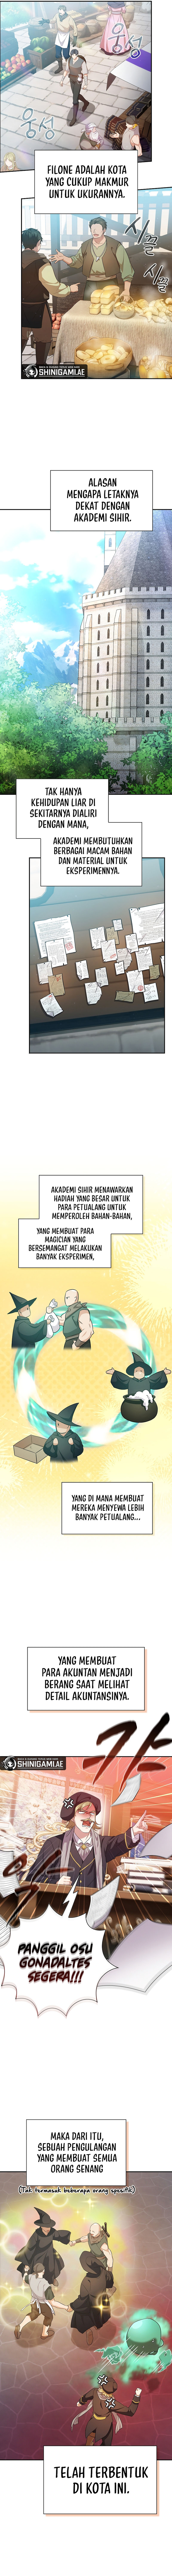 Magic Academy Survival Guide Chapter 70 - 85